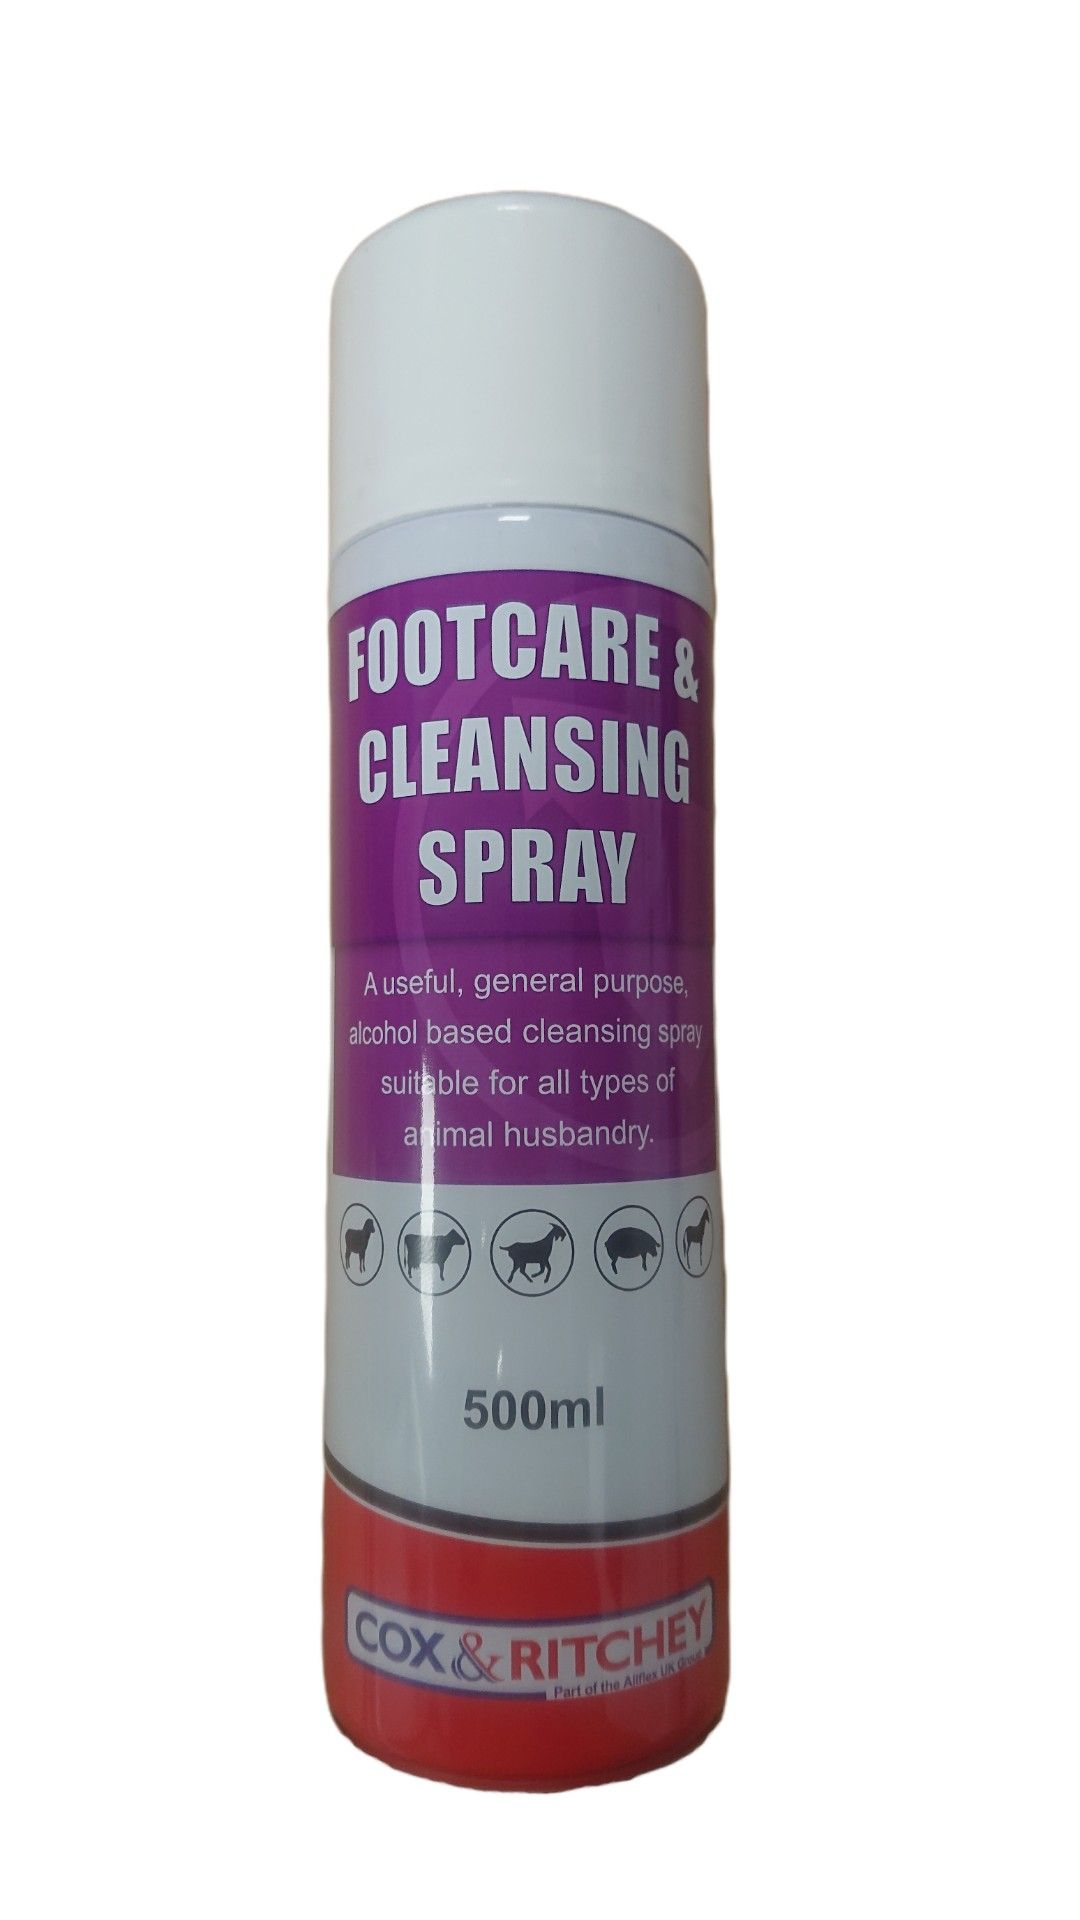 Footcare and Cleansing Spray